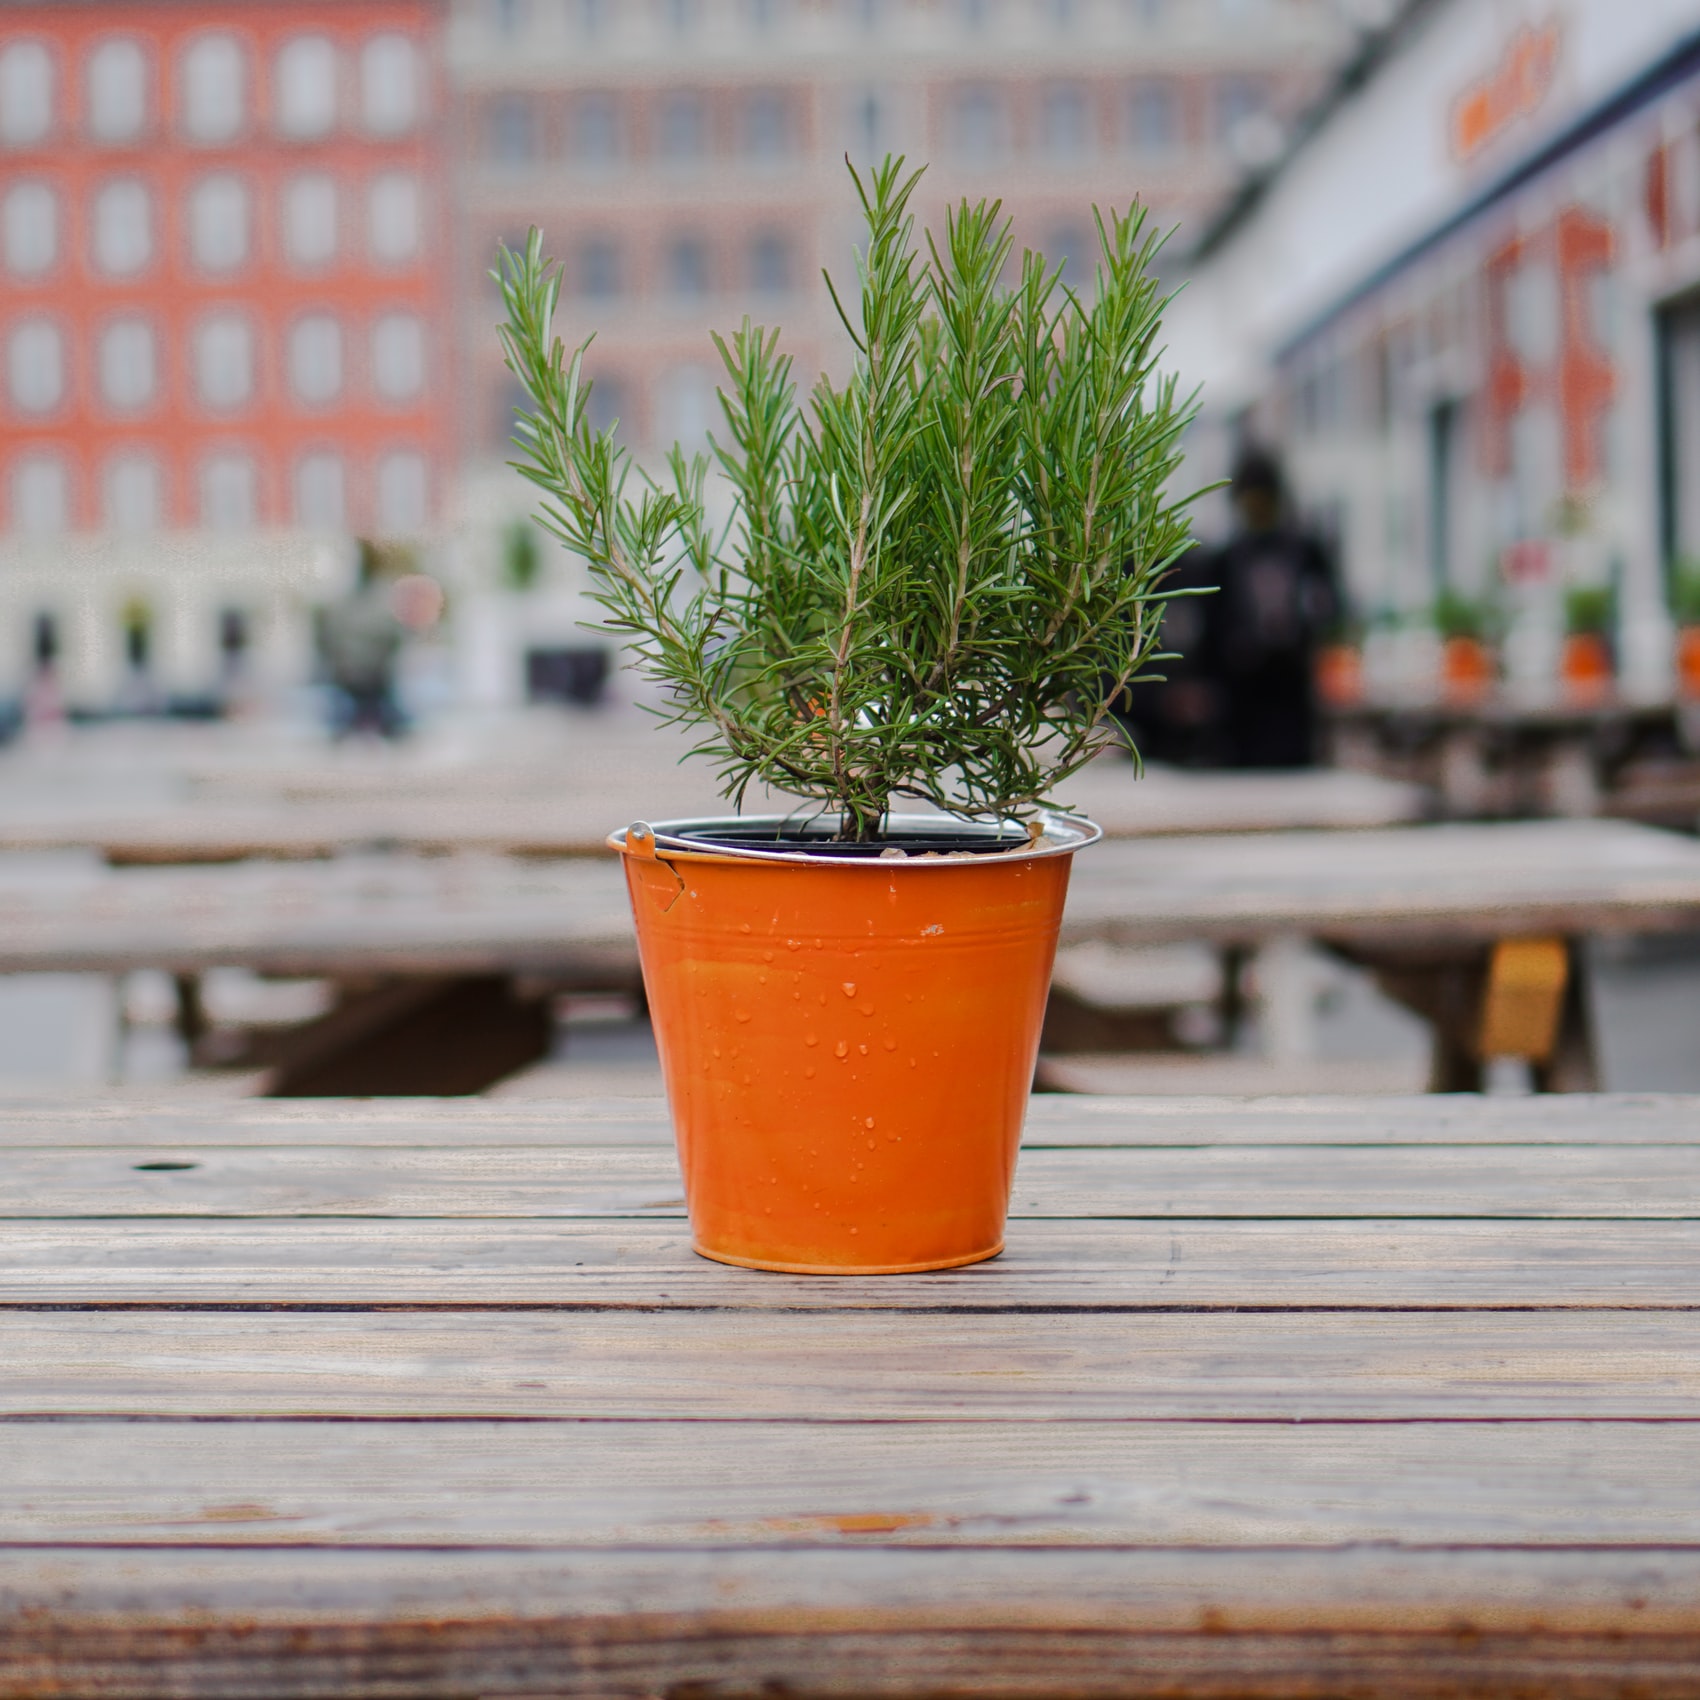 Rosemary will protect your vegetable plants by repelling a wide variety of bugs that will want to feed on the plants you’re growing and plan to eat. Keep them back with rosemary.